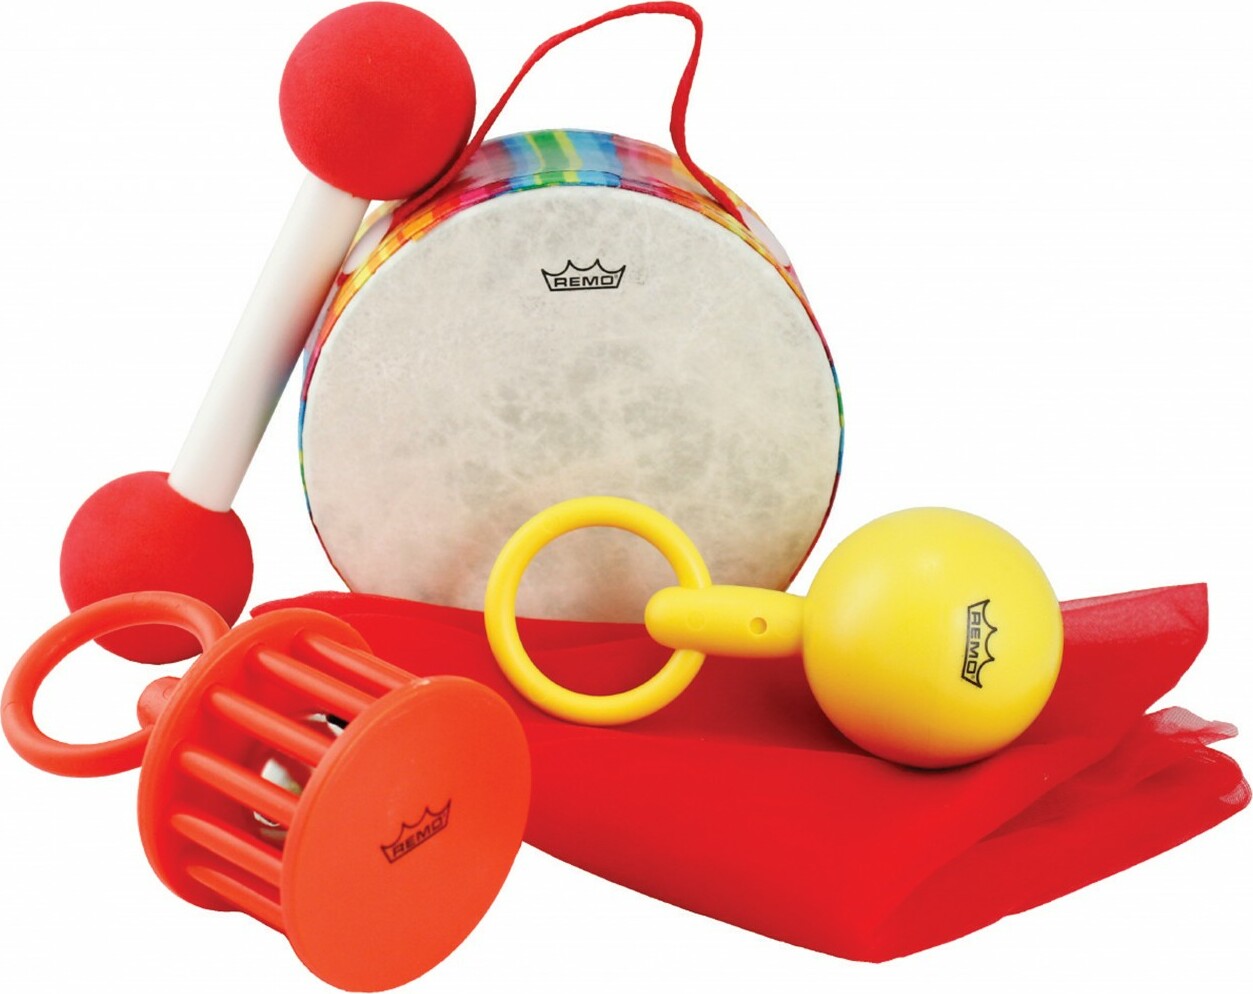 Remo Babies Make Music Kit Percussions - Percussion set for kids - Main picture